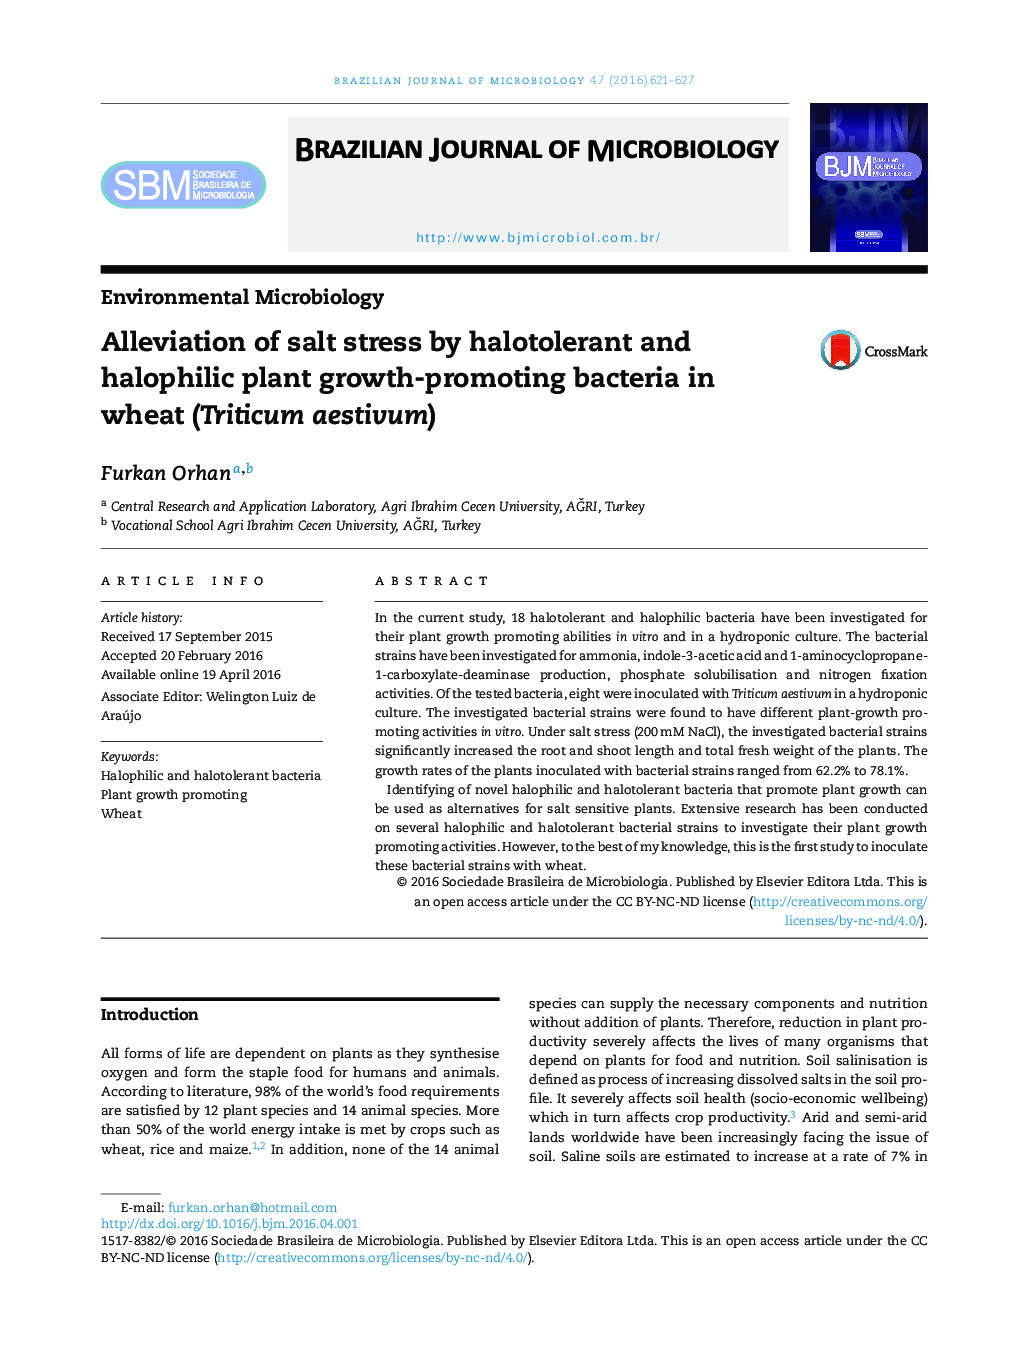 Alleviation of salt stress by halotolerant and halophilic plant growth-promoting bacteria in wheat (Triticum aestivum)